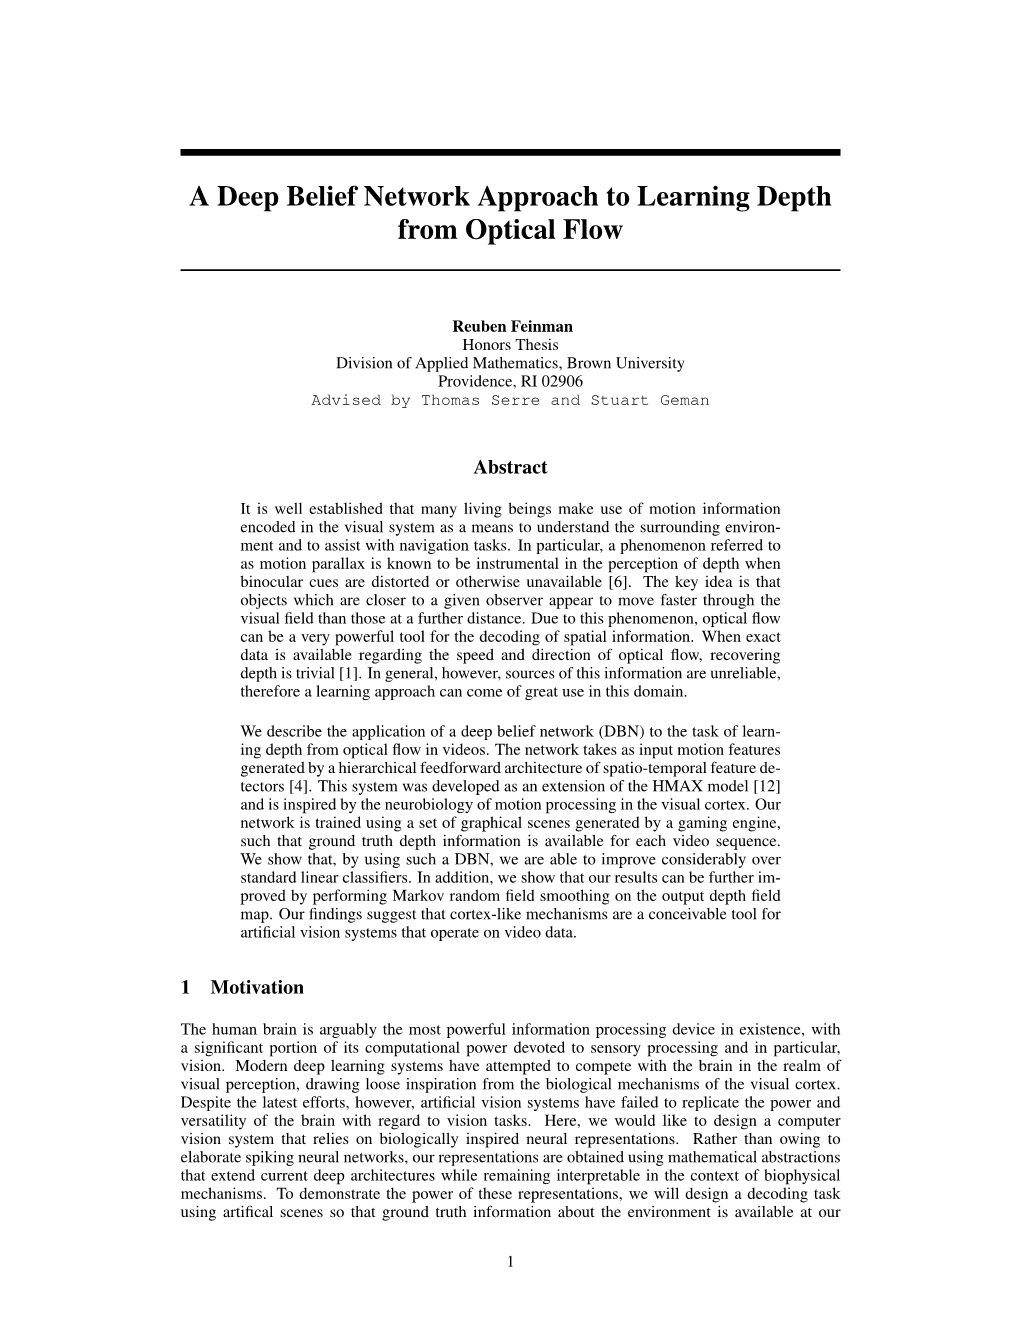 A Deep Belief Network Approach to Learning Depth from Optical Flow